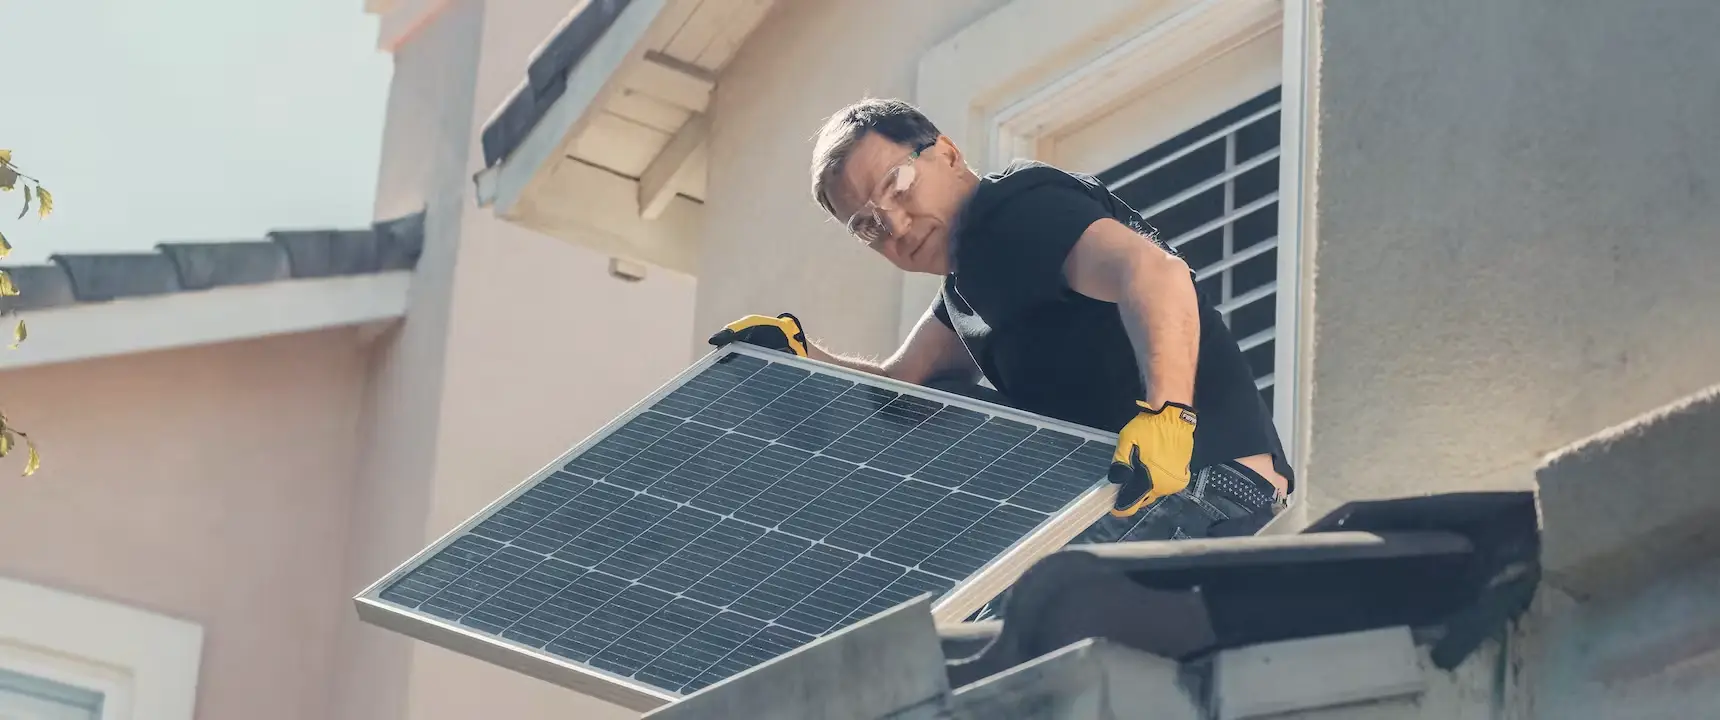 a person with a pair of yellow gloves installing a solar panel